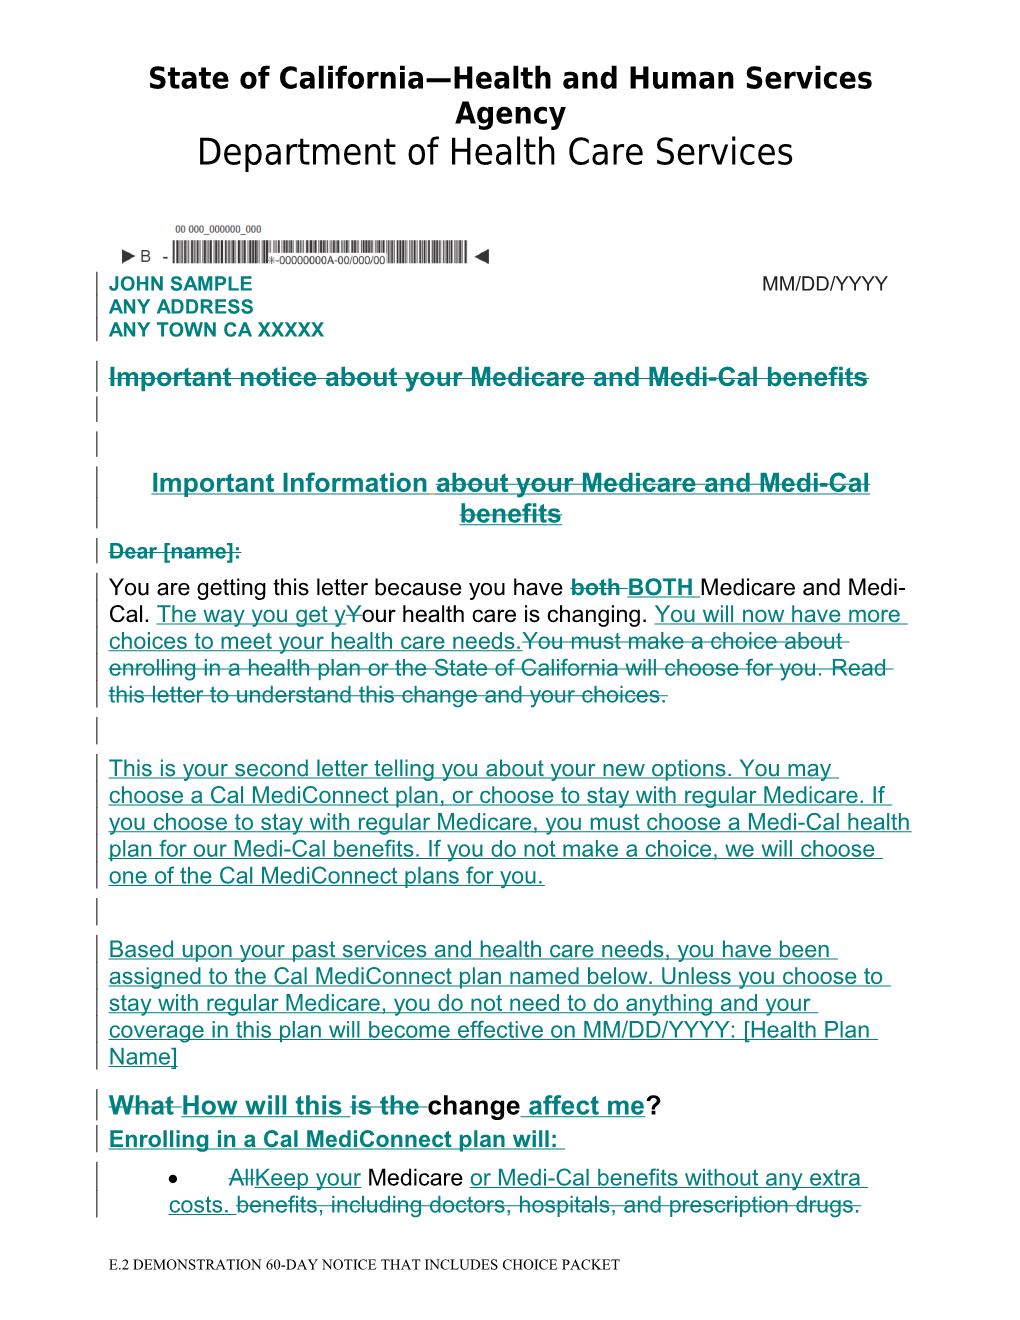 Important Notice About Your Medicare and Medi-Cal Benefits